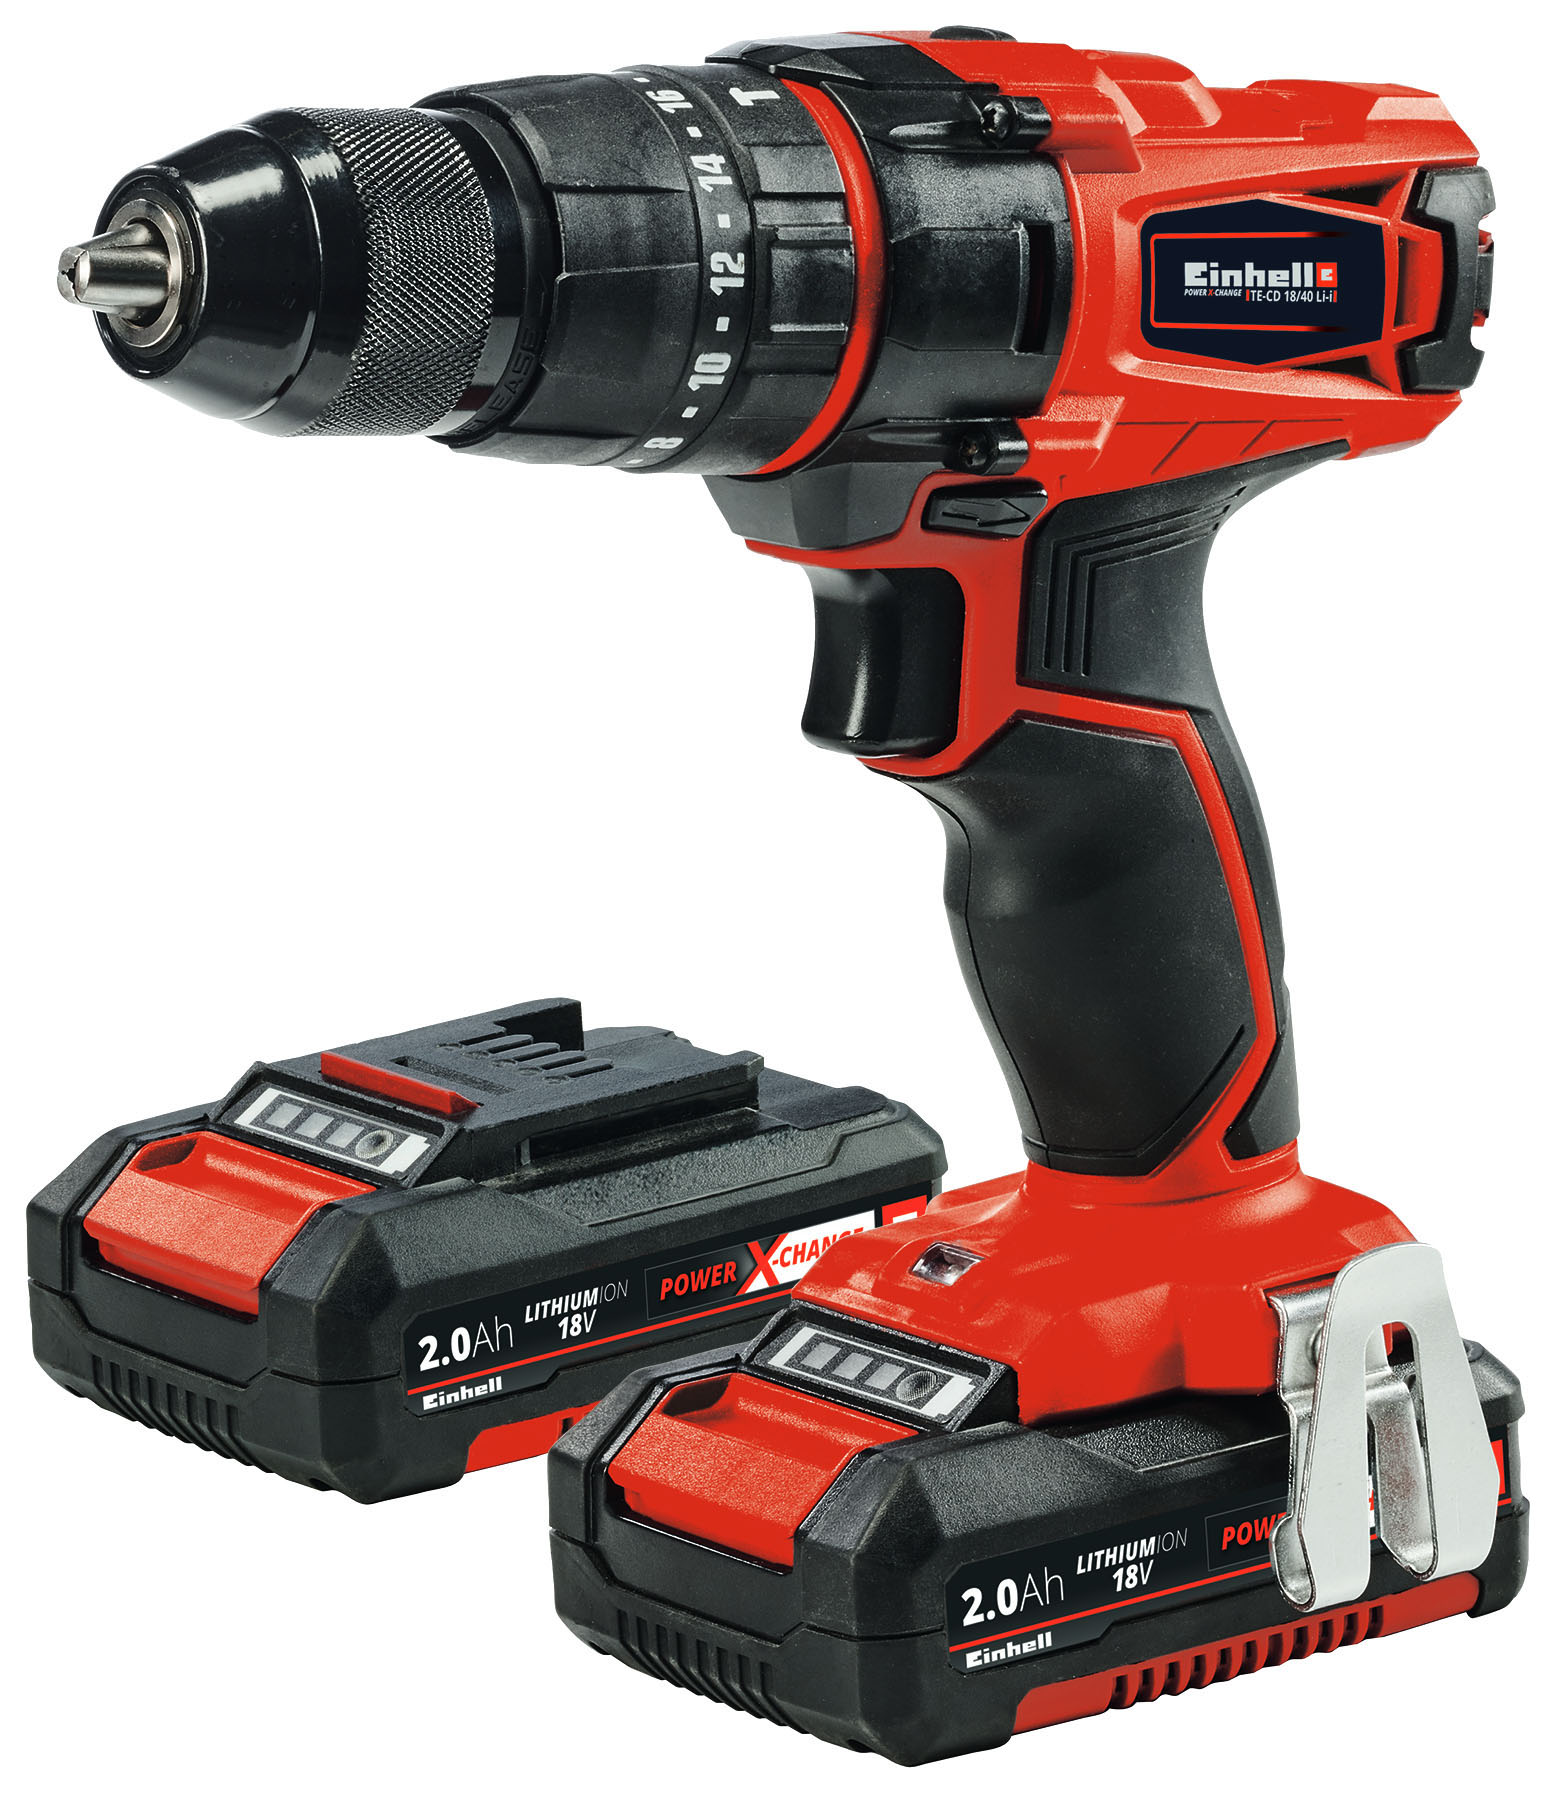 Image of Einhell Power X-Change 18V 2 x 2.0Ah Combi Drill